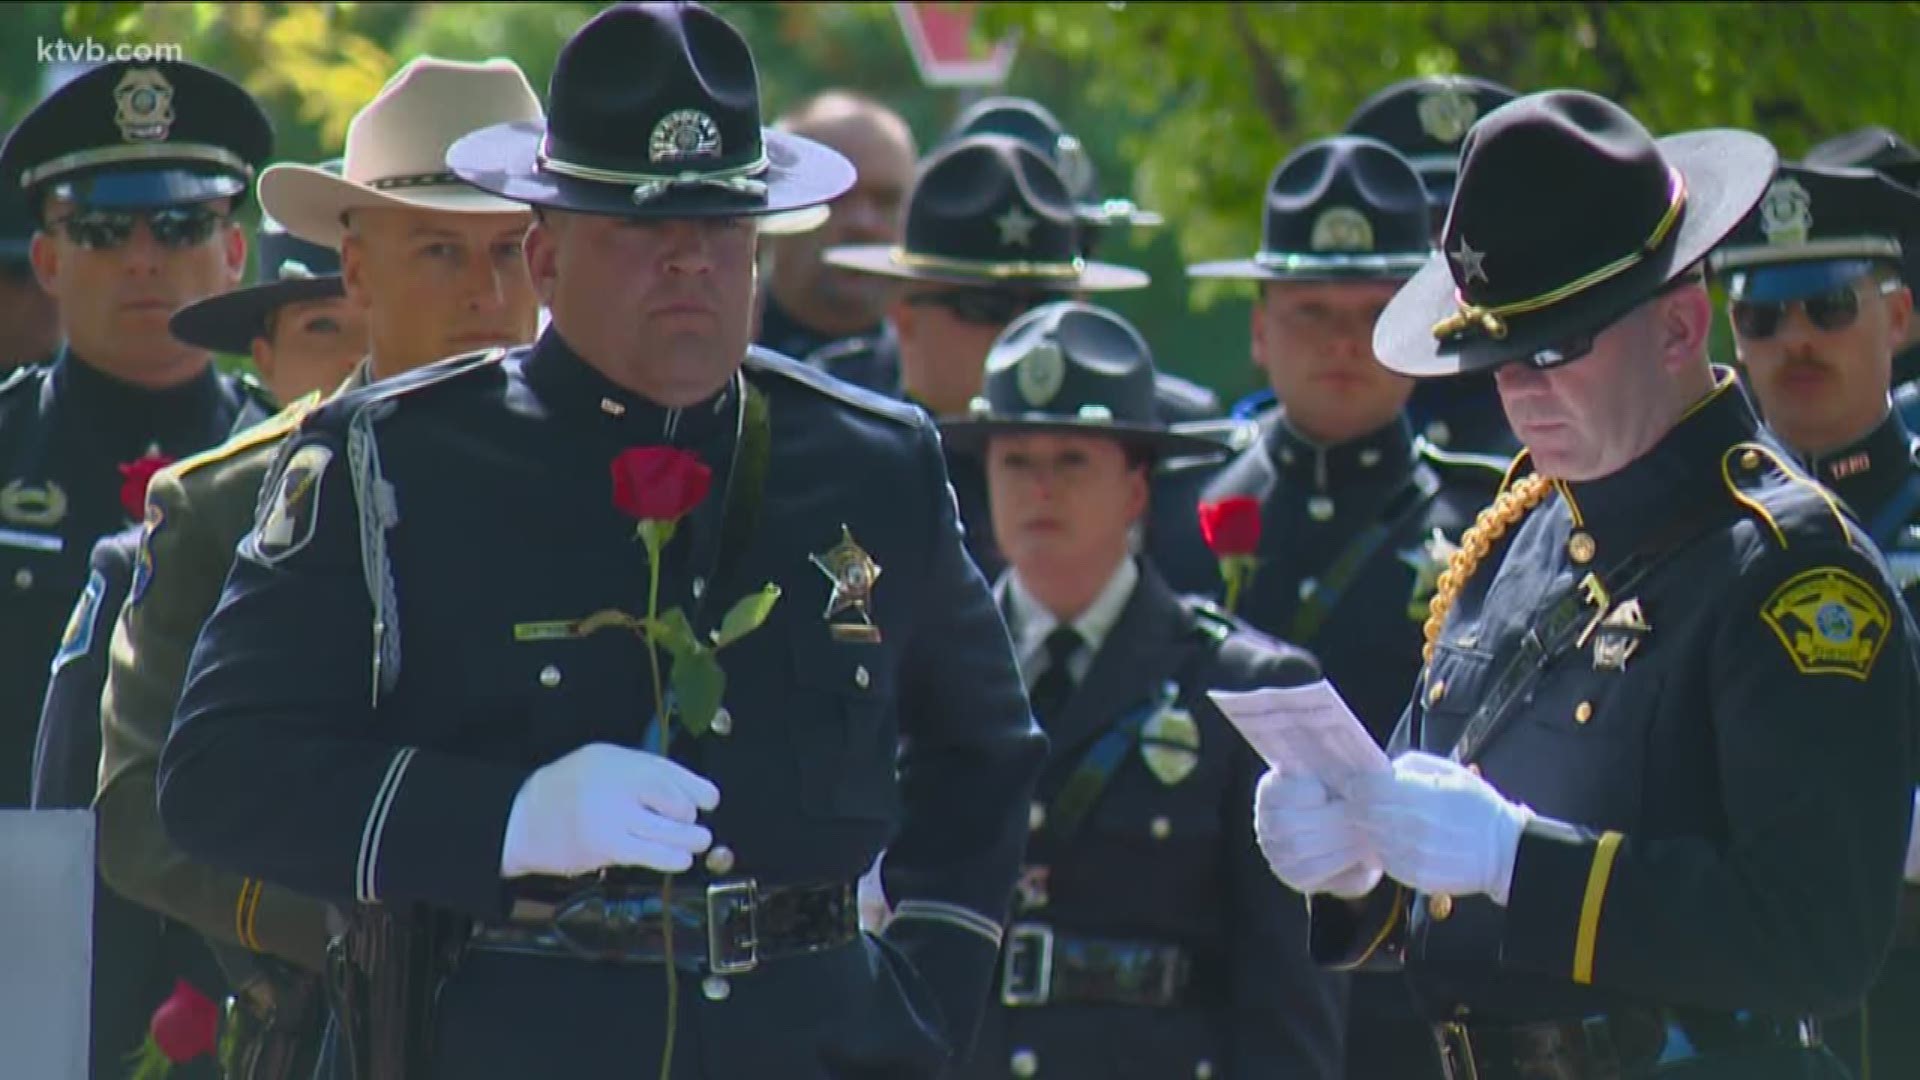 One new name was added to the Idaho Peace Officer Memorial on Thursday.